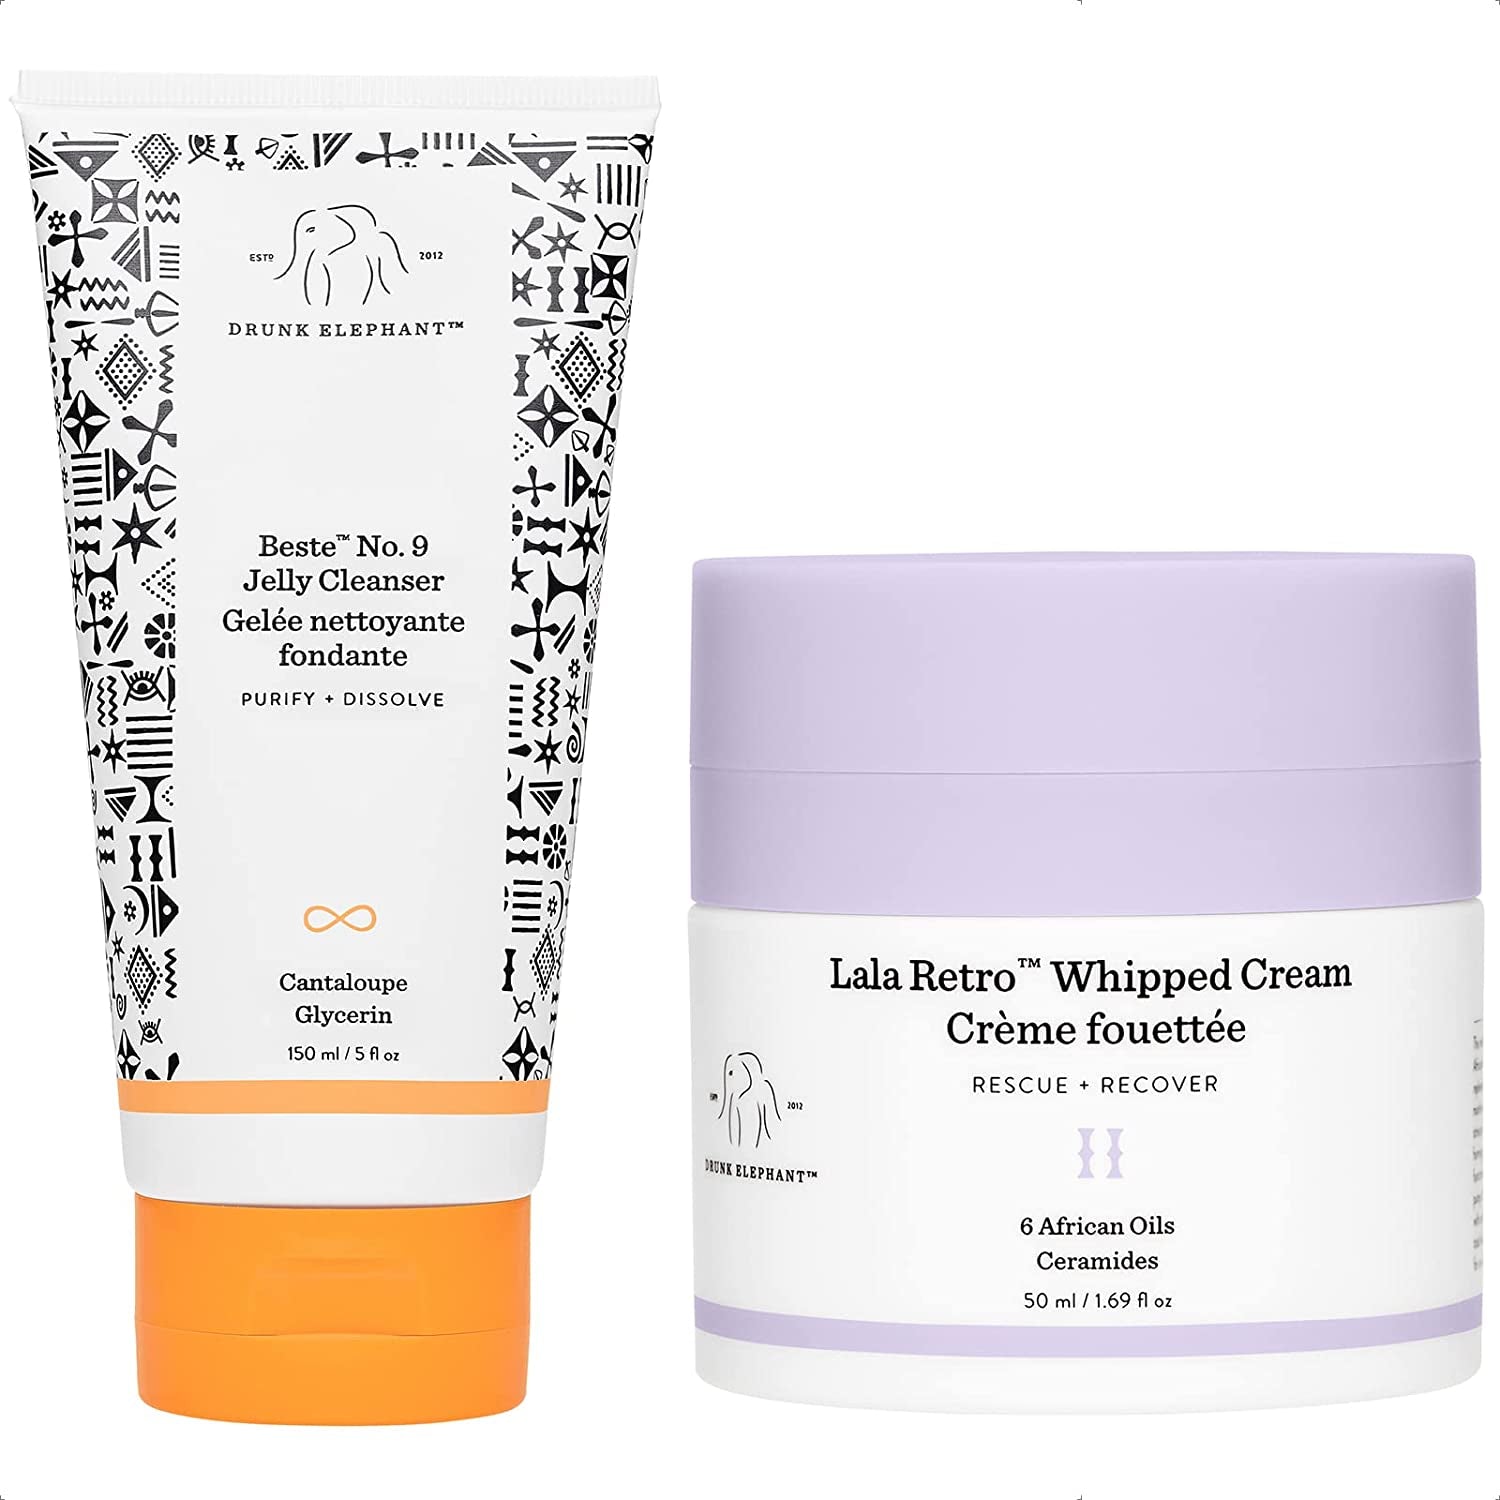 Drunk Elephant Hit It off Face Wash and Facial Moisturizer Set Beste No. 9 Jelly Cleanser (150 Ml / 5 Fl Oz) and Lala Retro Whipped Cream (50 Ml / 1.69 Fl Oz)